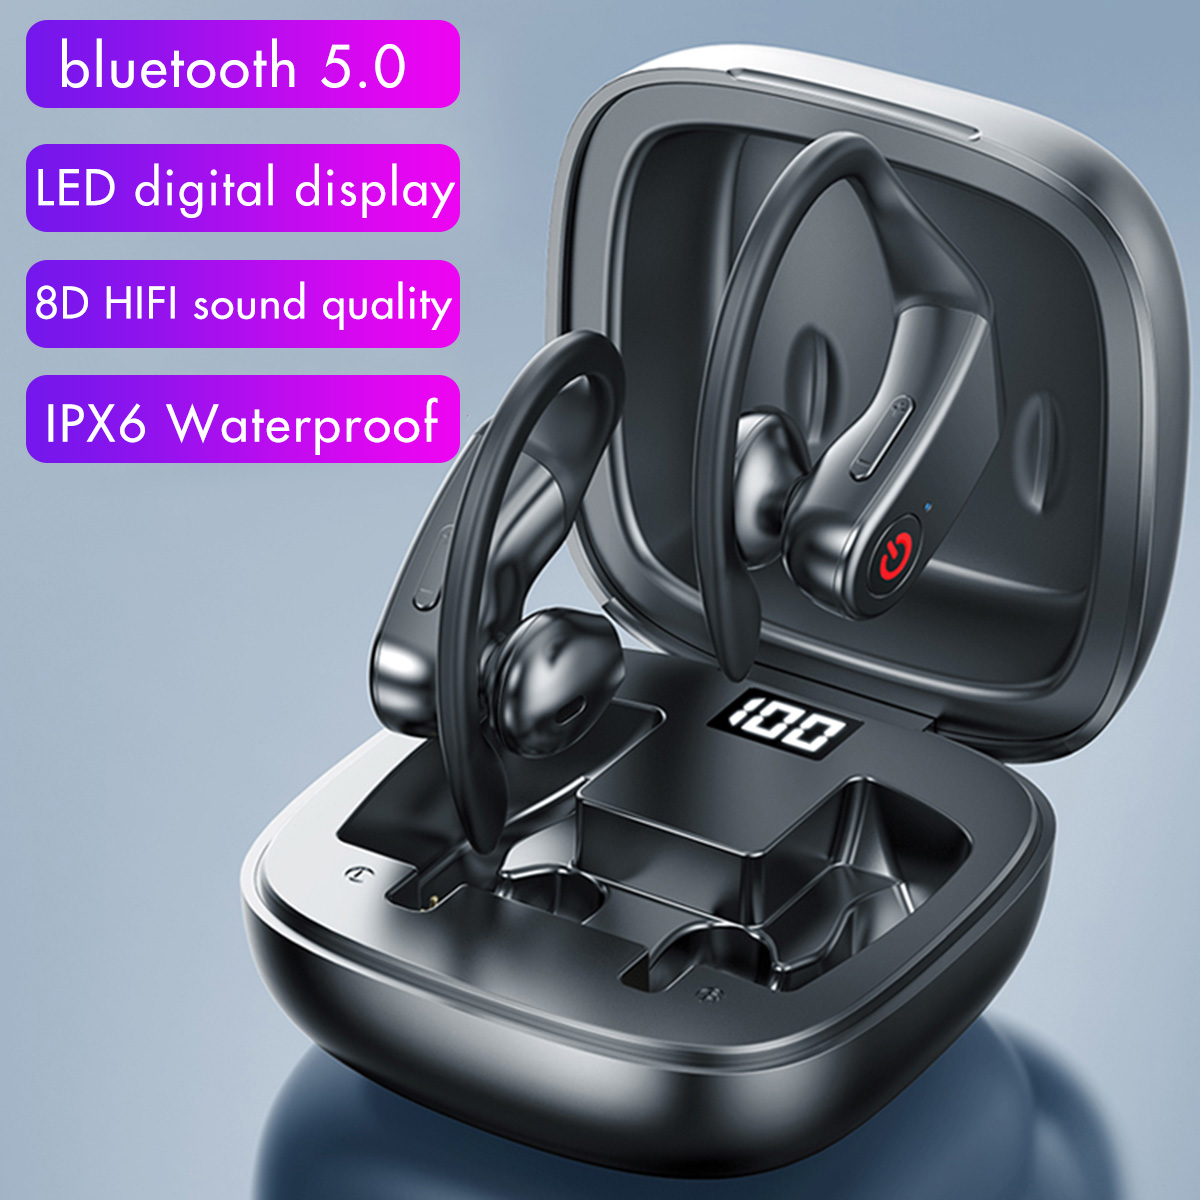 Bakeey B10 bluetooth 5.0 TWS bluetooth Earphone LED Display Low Latency 8D Stereo Gaming Noise Cancelling Headset With Mic